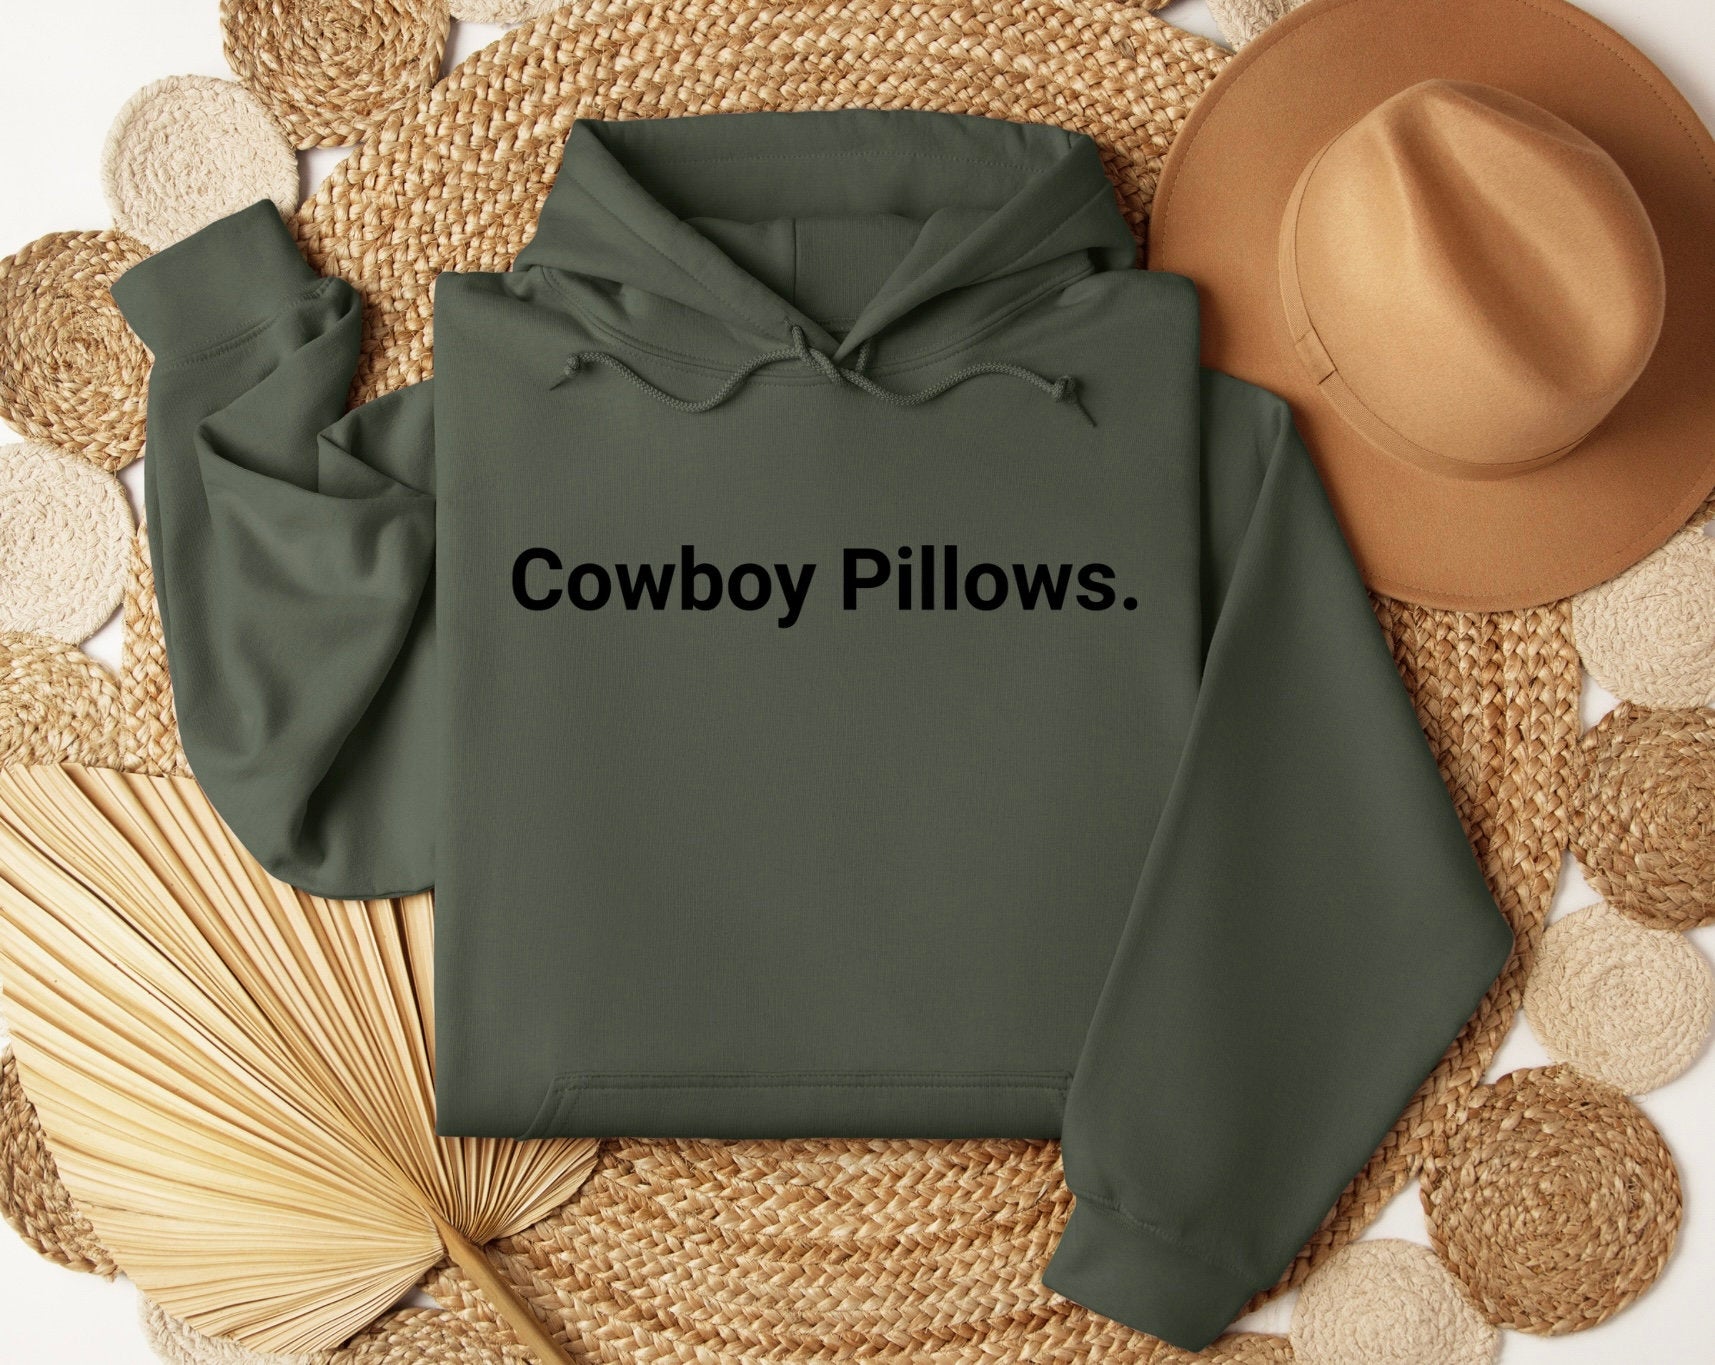 Cowboy Pillows Sweatshirt, Cowboy Pillows Tee, Funny Crewneck, Country Sweater, Oversized Sweater, Comfy Sweater, Fathers Day Gift, Dad Gift